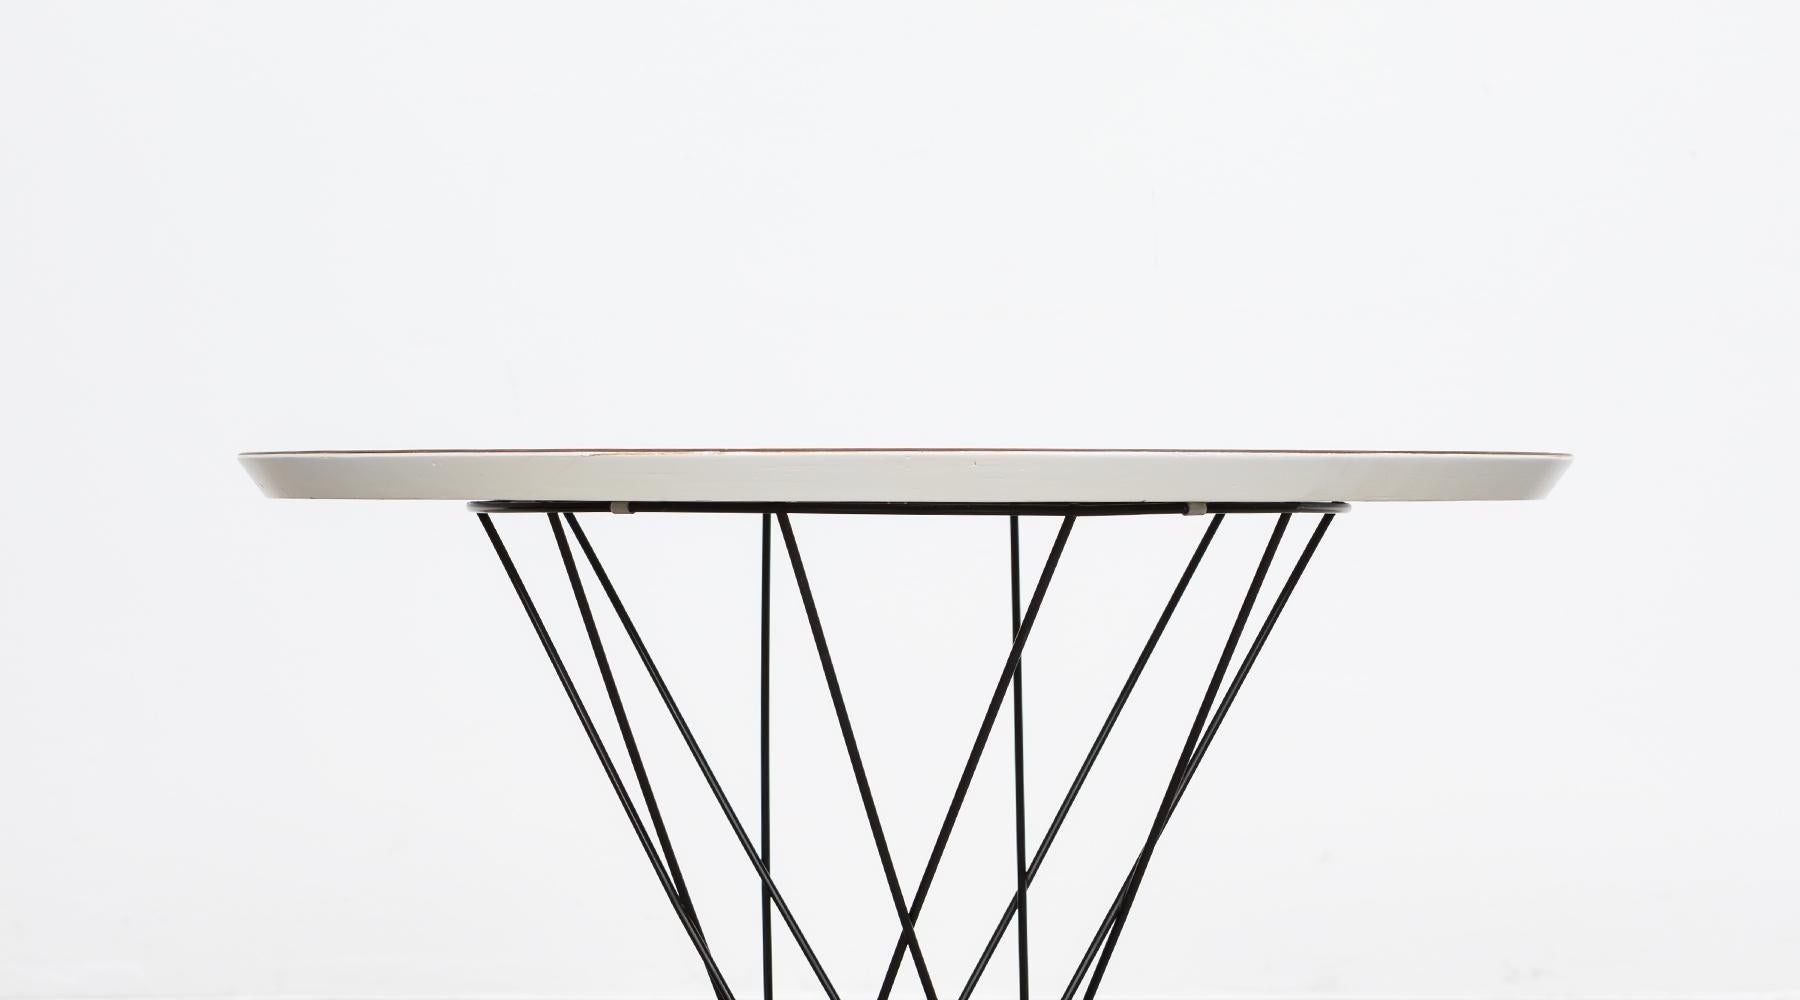 Sculptural side table by Isamu Noguchi, USA, 1954.

Beautiful side table by Isamu Noguchi. The table comes with a white laminate top with a figurative metal construction as base and ends again on a round wood top. Manufactured by Knoll